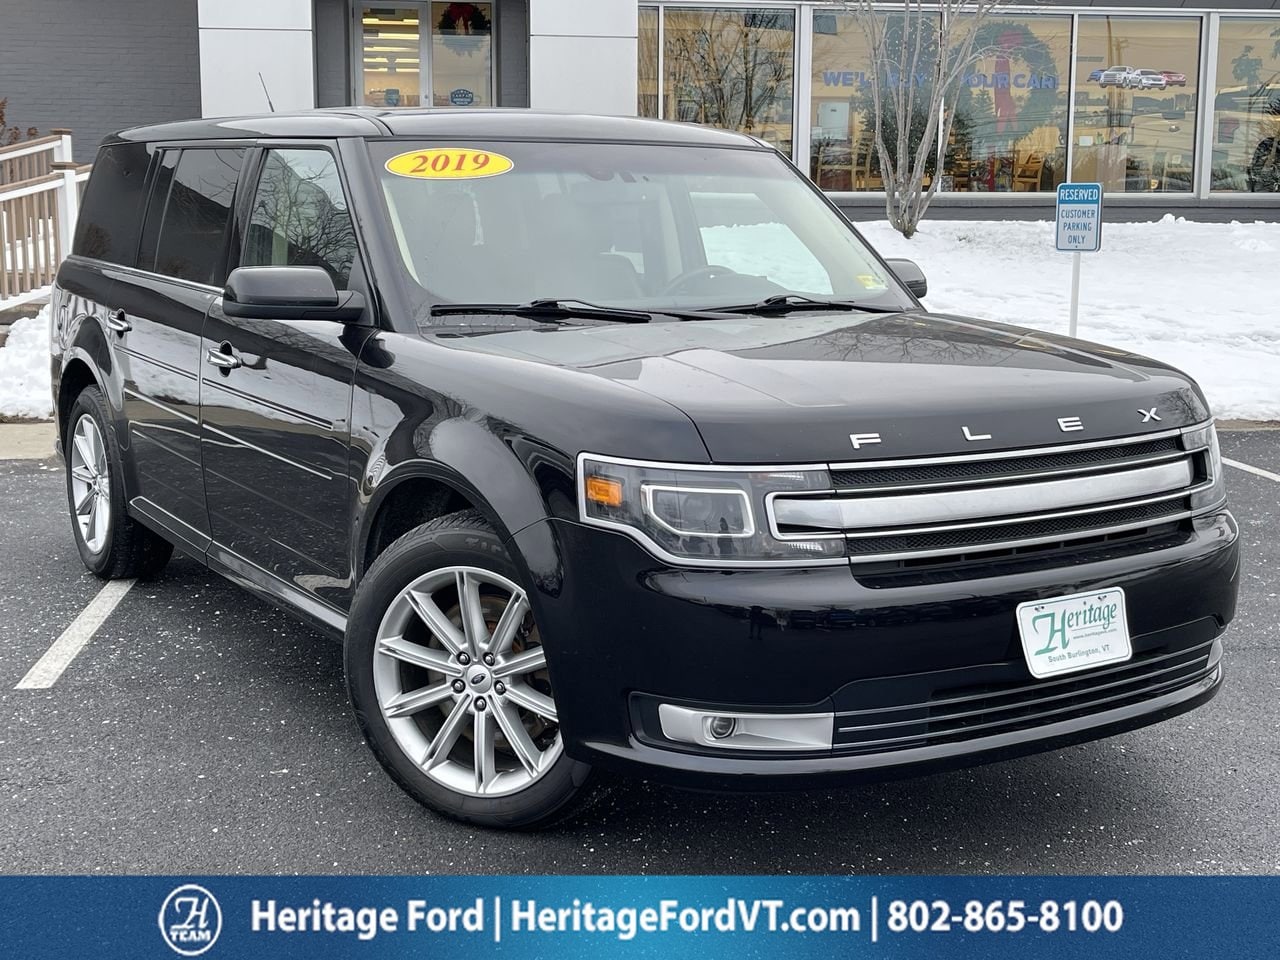 Used 2019 Ford Flex For Sale at Heritage Ford | VIN: 2FMHK6D8XKBA03310